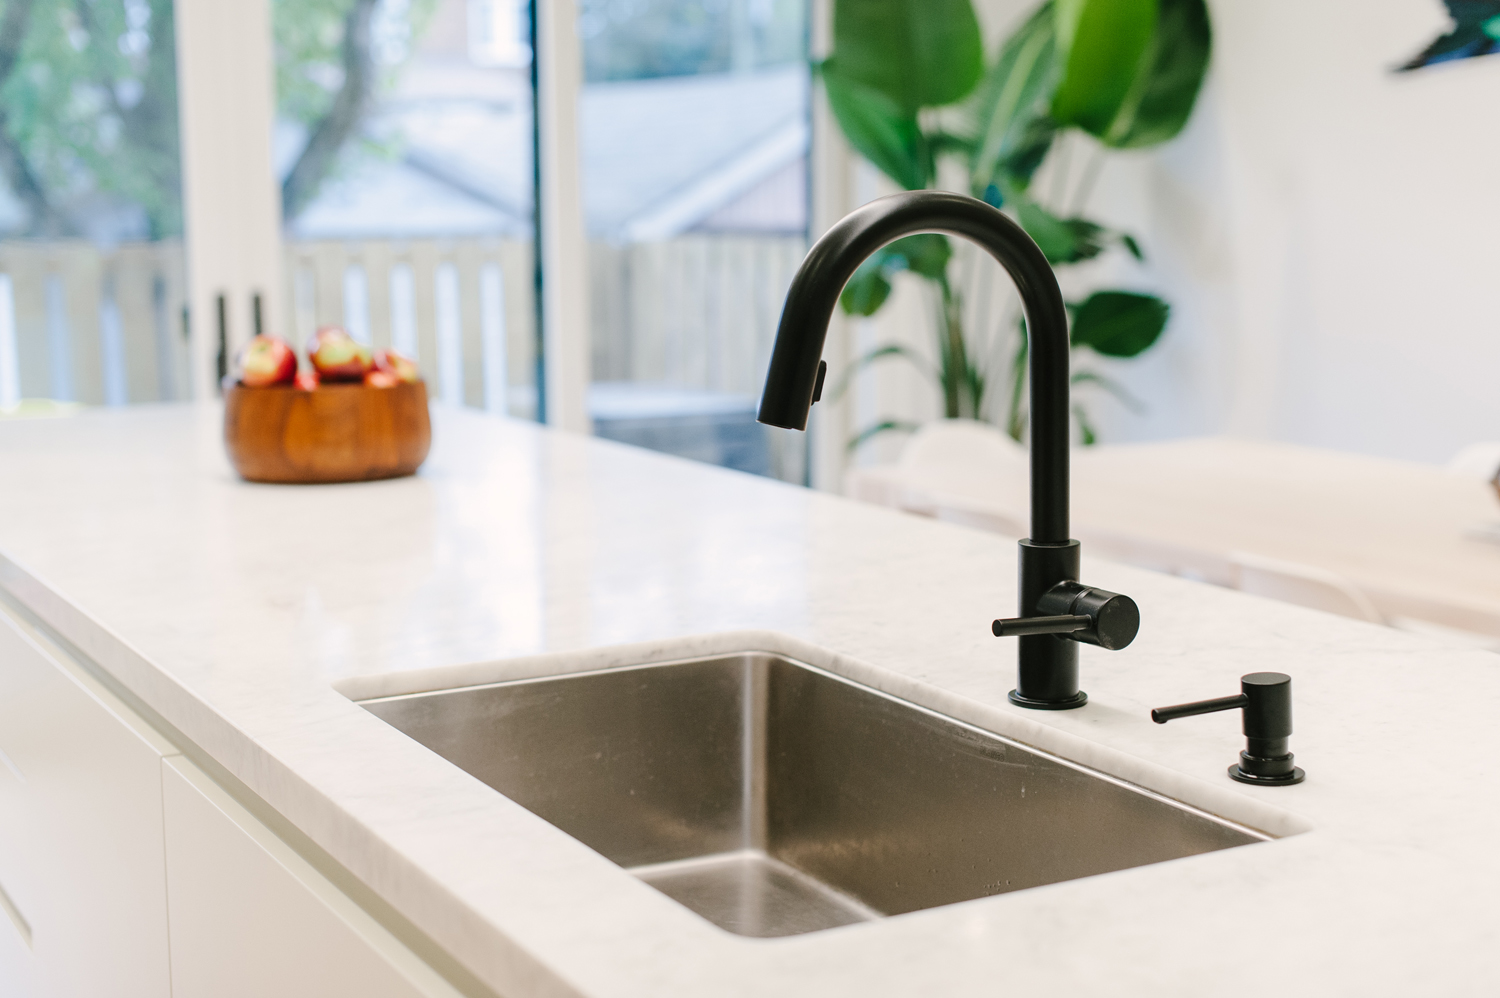 Black kitchen faucet mounted on white counter